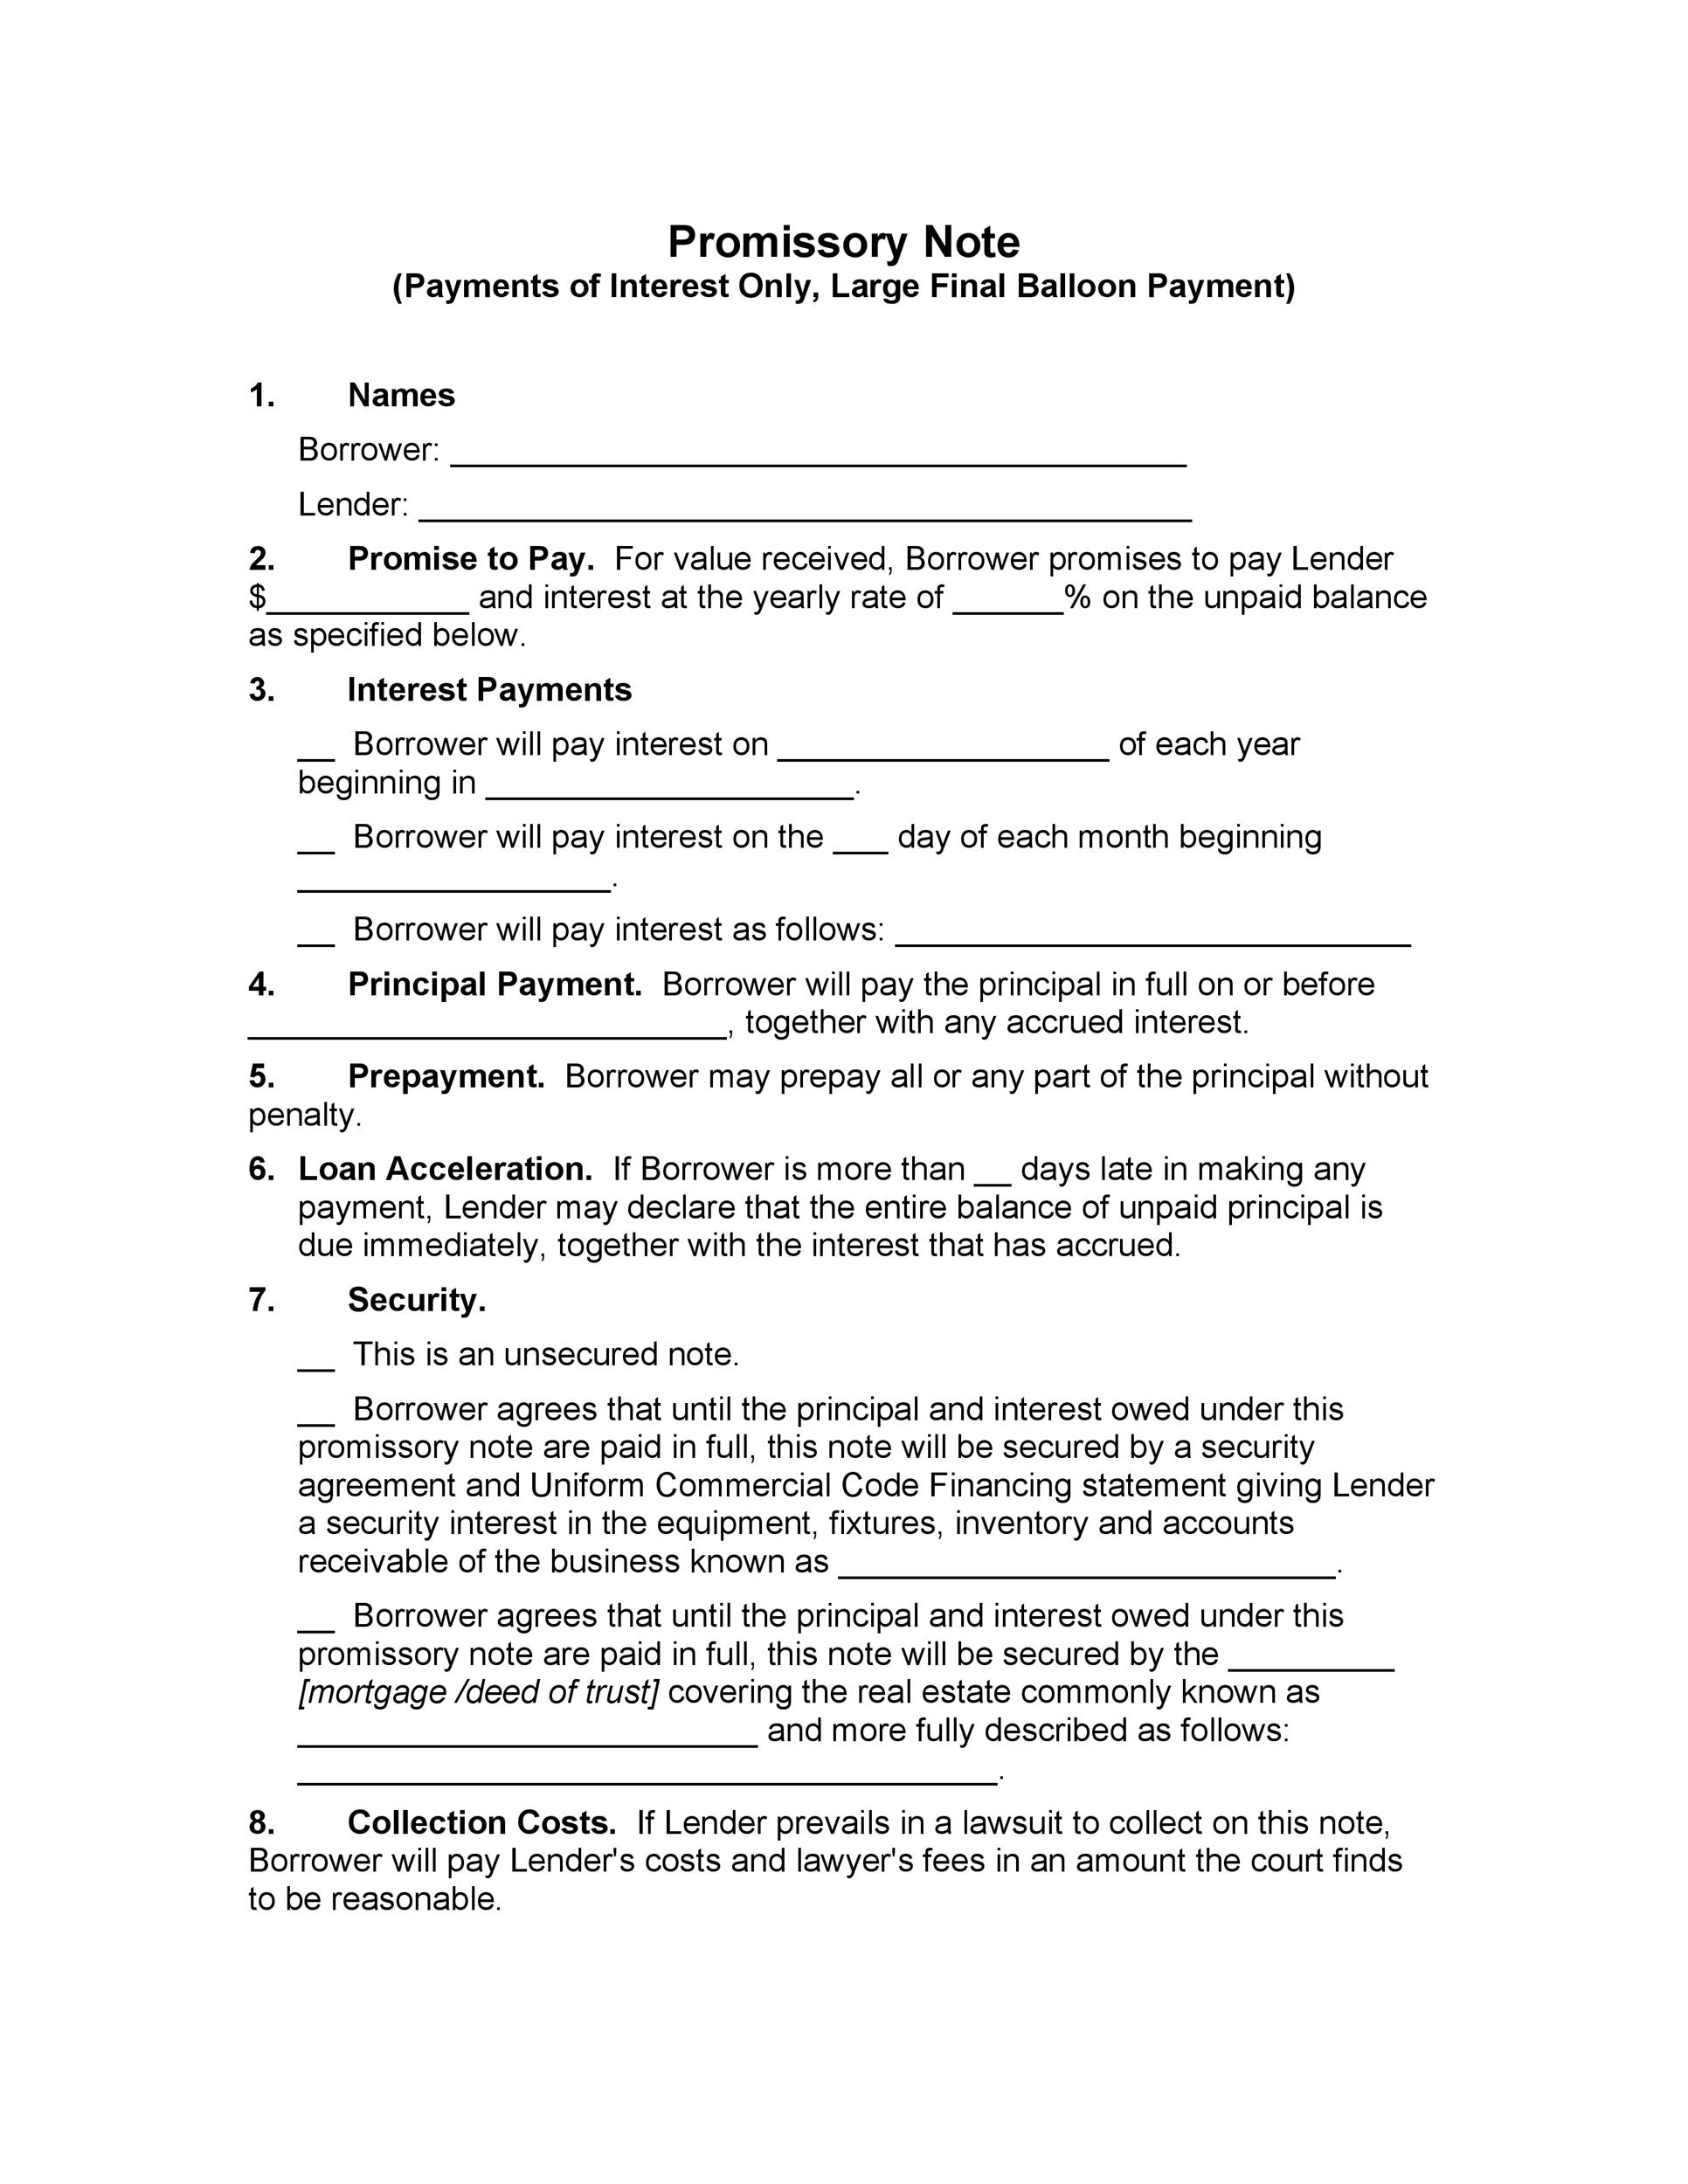 45 FREE Promissory Note Templates & Forms [Word & PDF] ᐅ TemplateLab